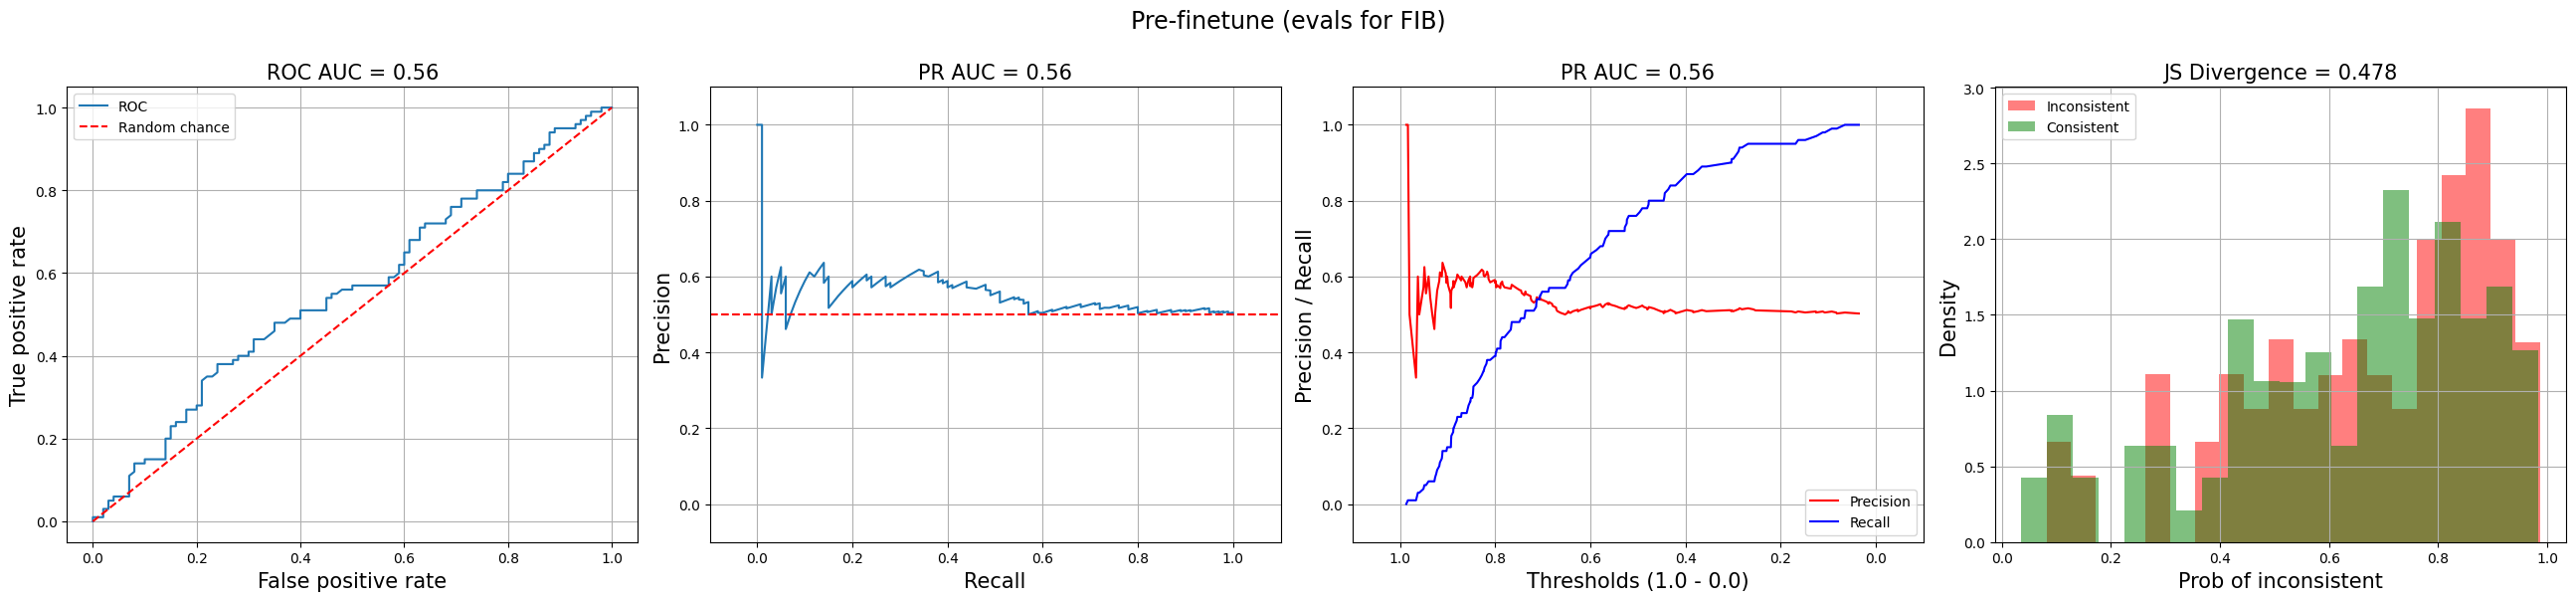 Plots for the NLI-based eval of factual inconsistency before finetuning